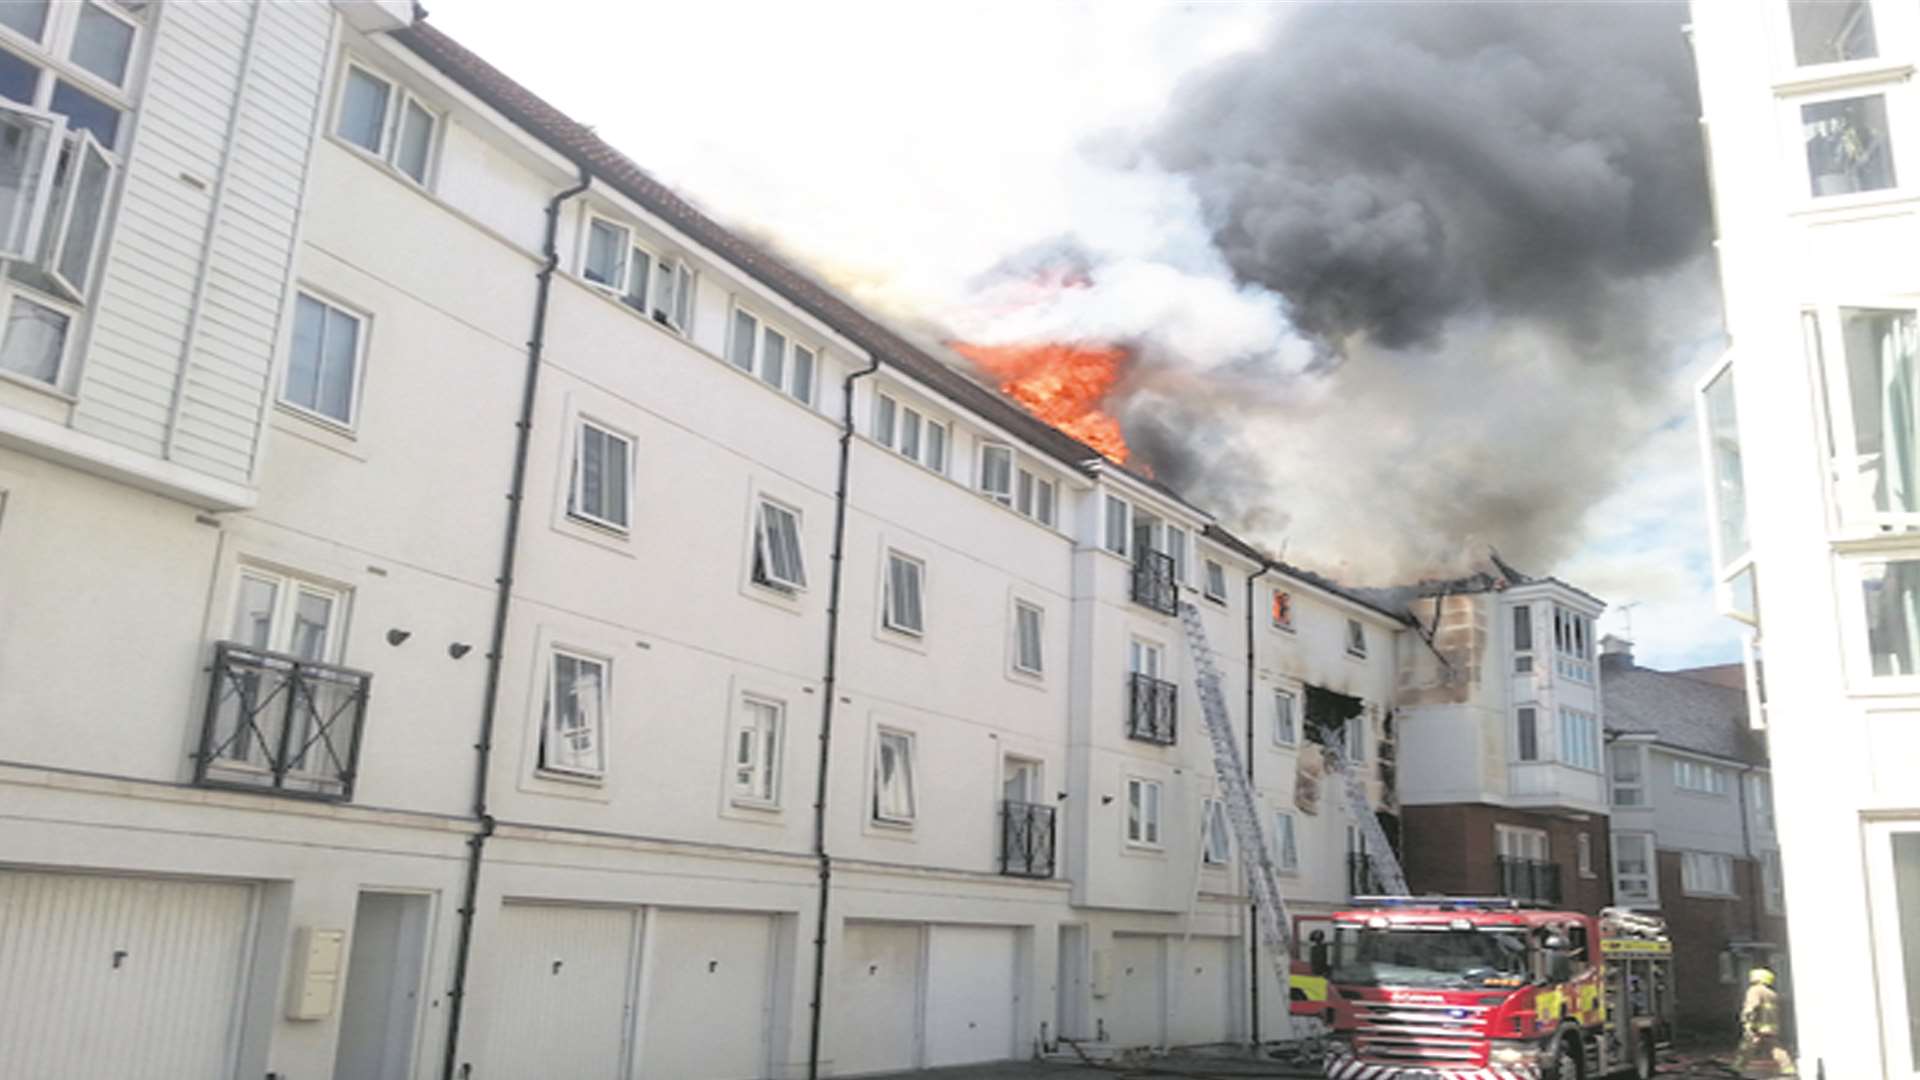 Flames ripped through the building